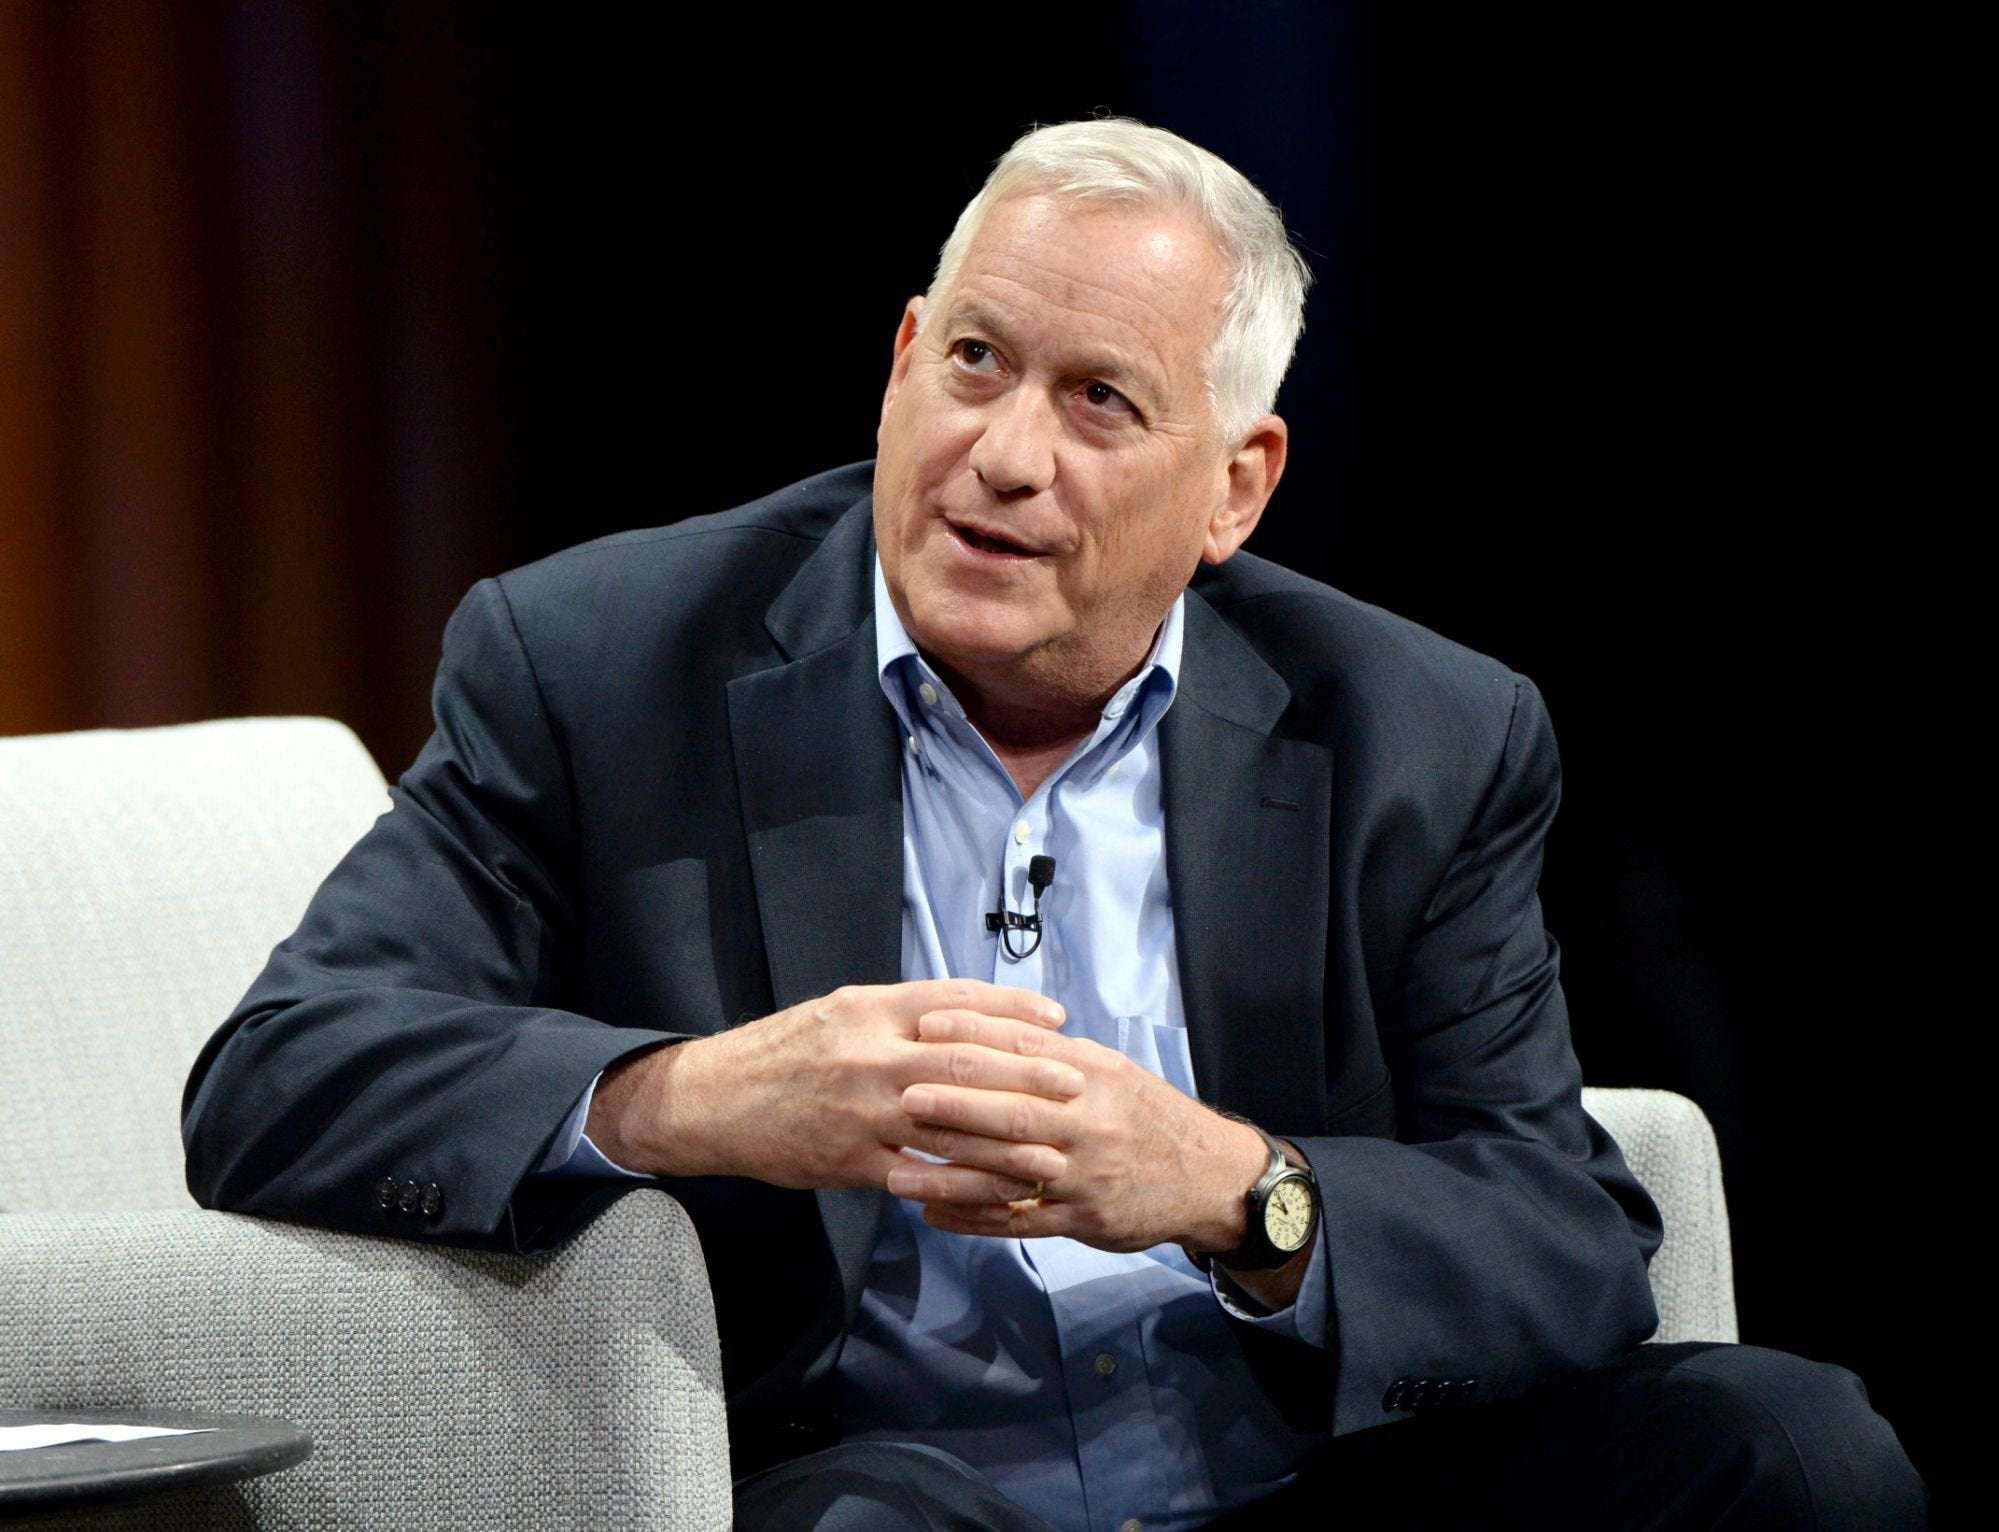 image for Facebook and Twitter algorithms incentivize 'people to get enraged': Walter Isaacson